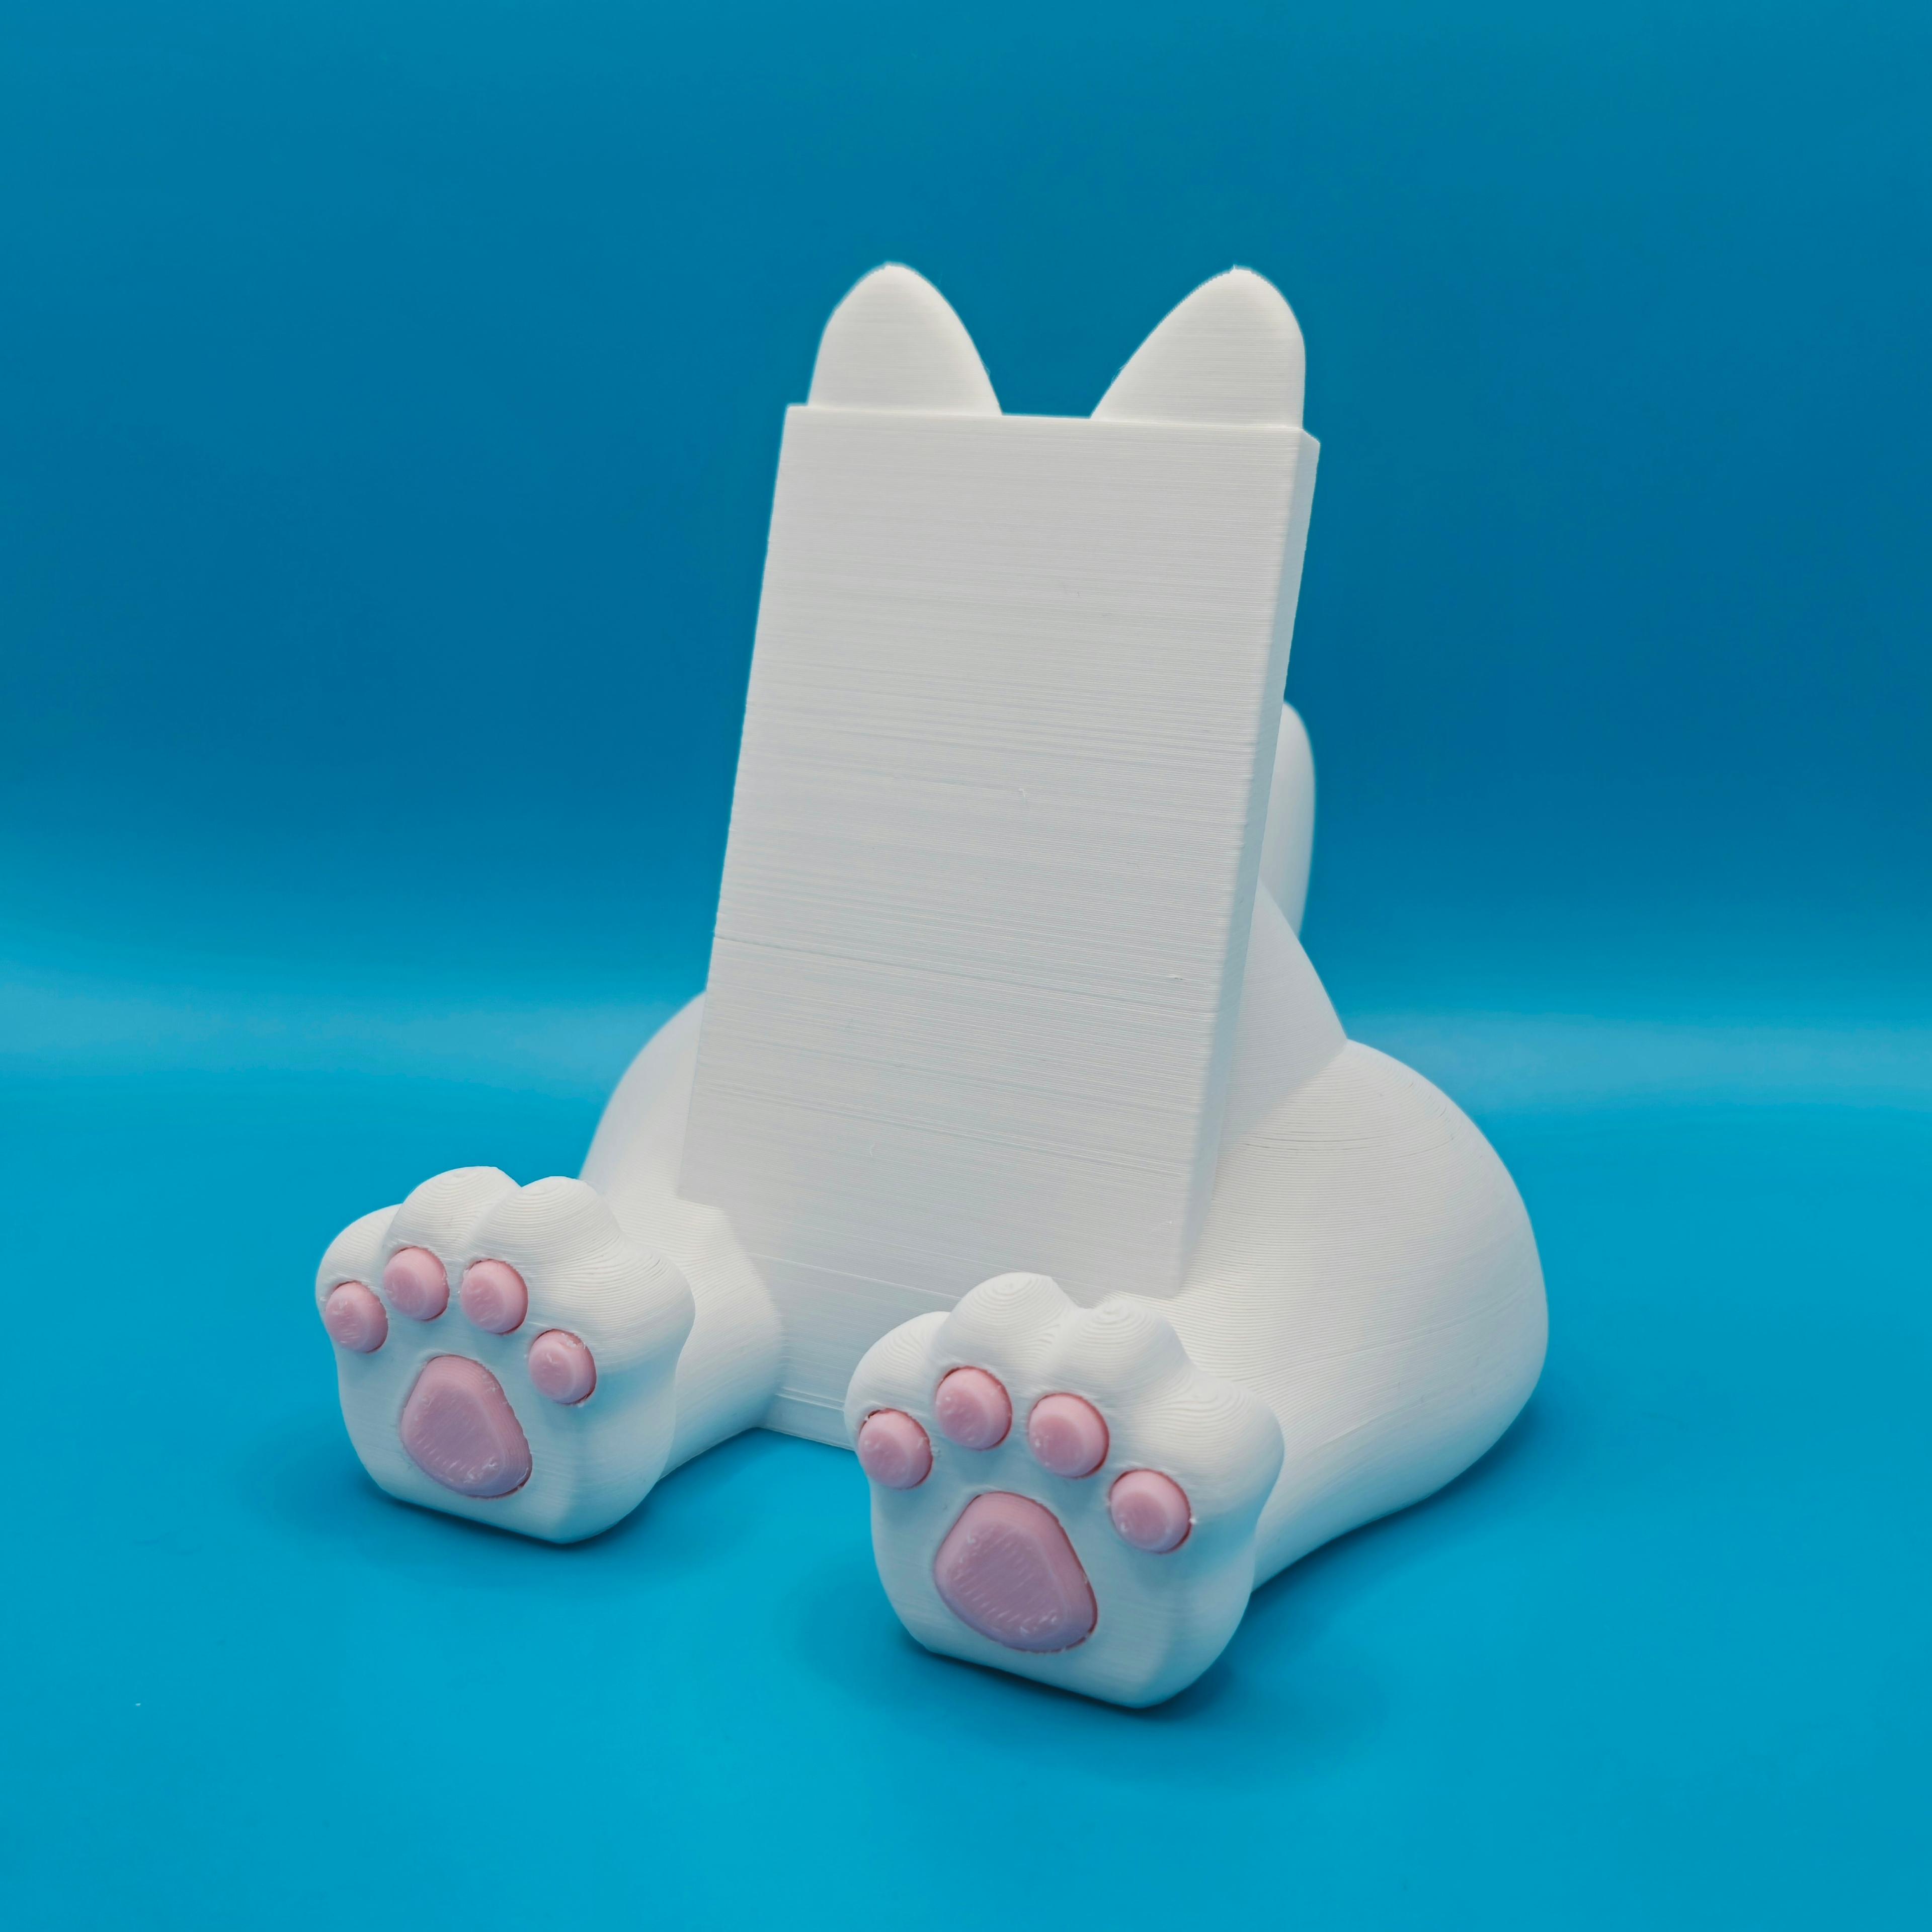 Cat Feet Phone Holder - Free for this week only! 3d model